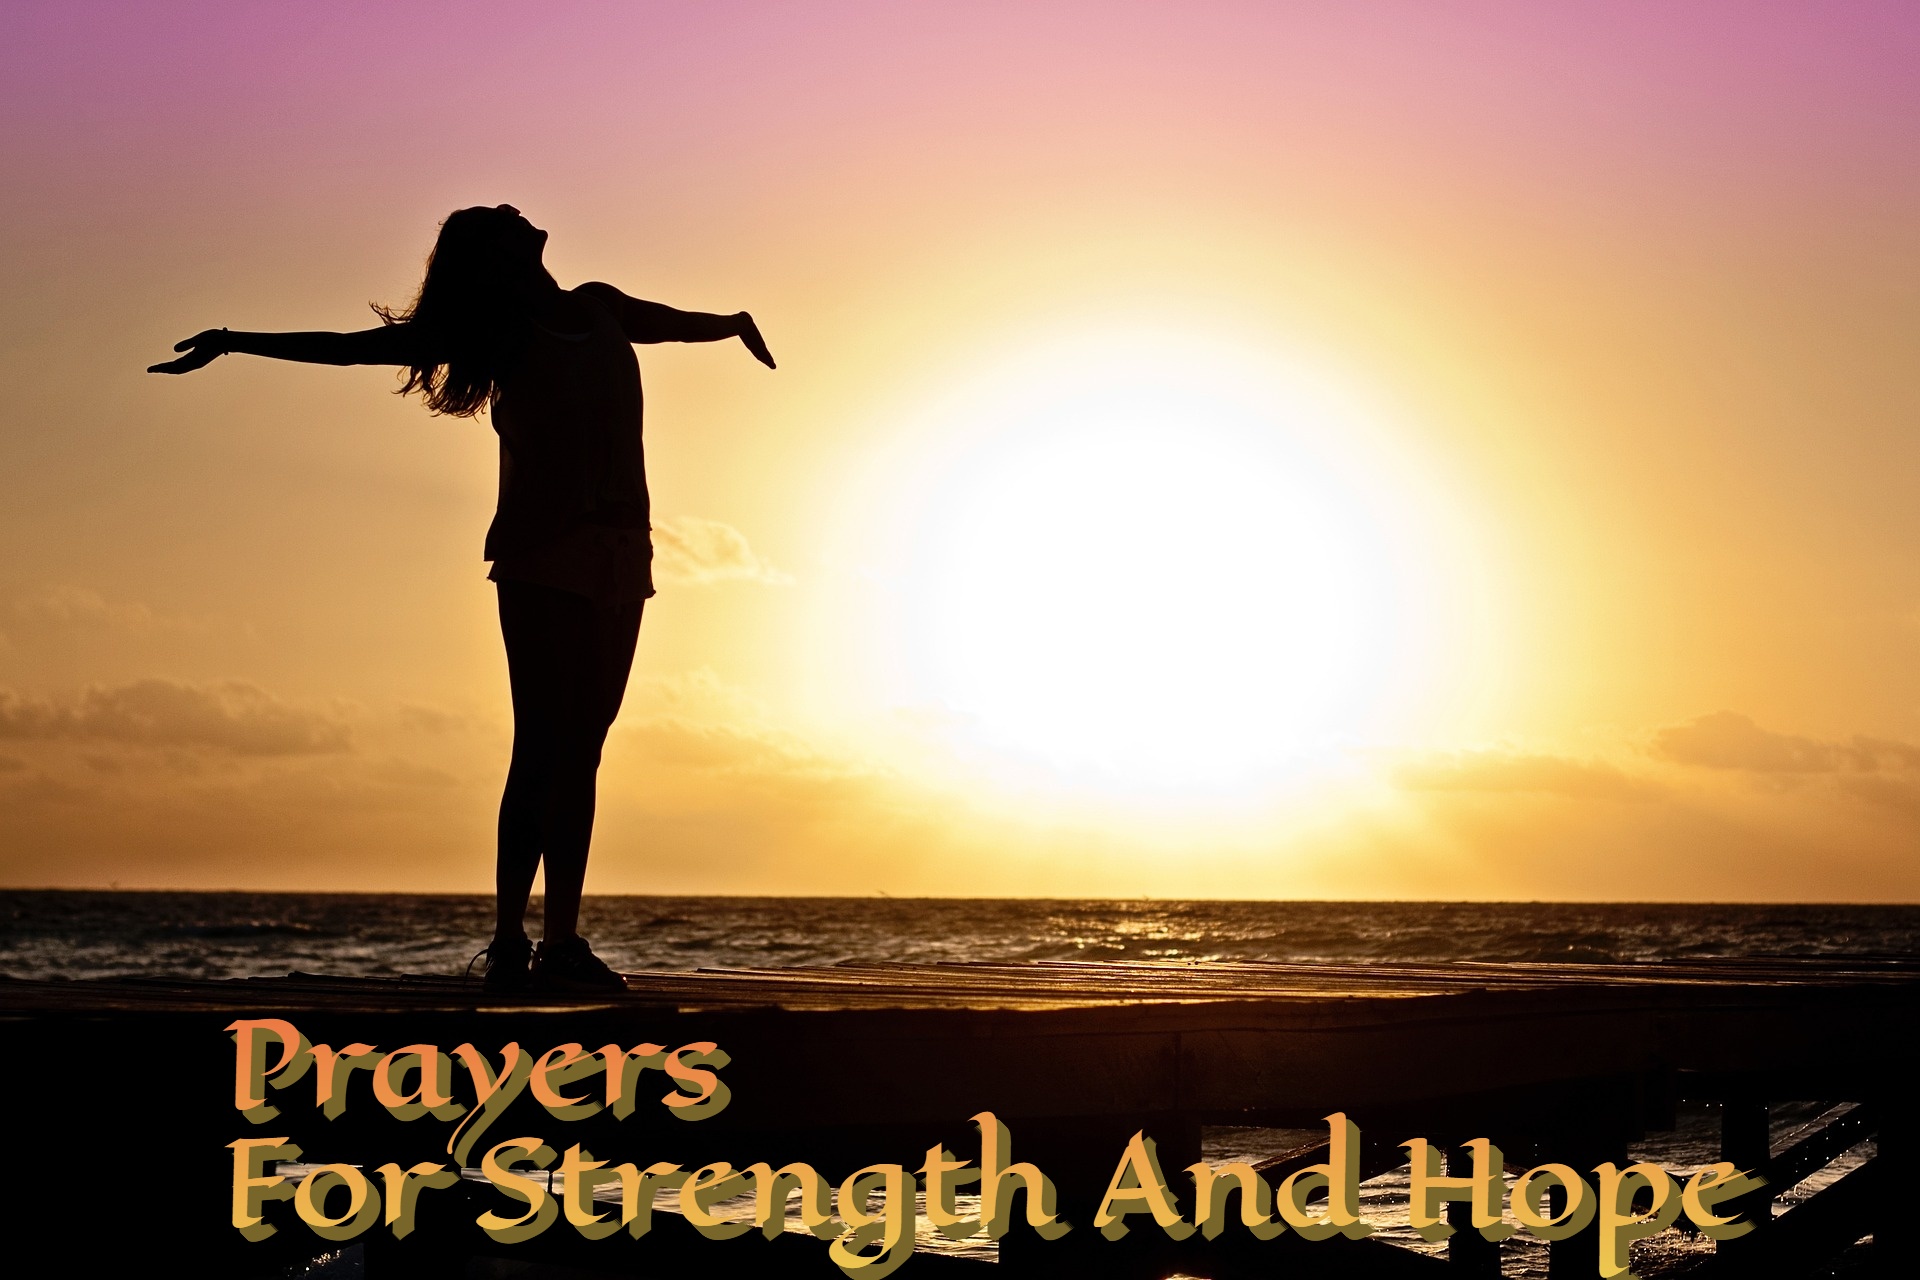 Prayers For Strength And Hope - Prayers To Get Through A Difficult Time